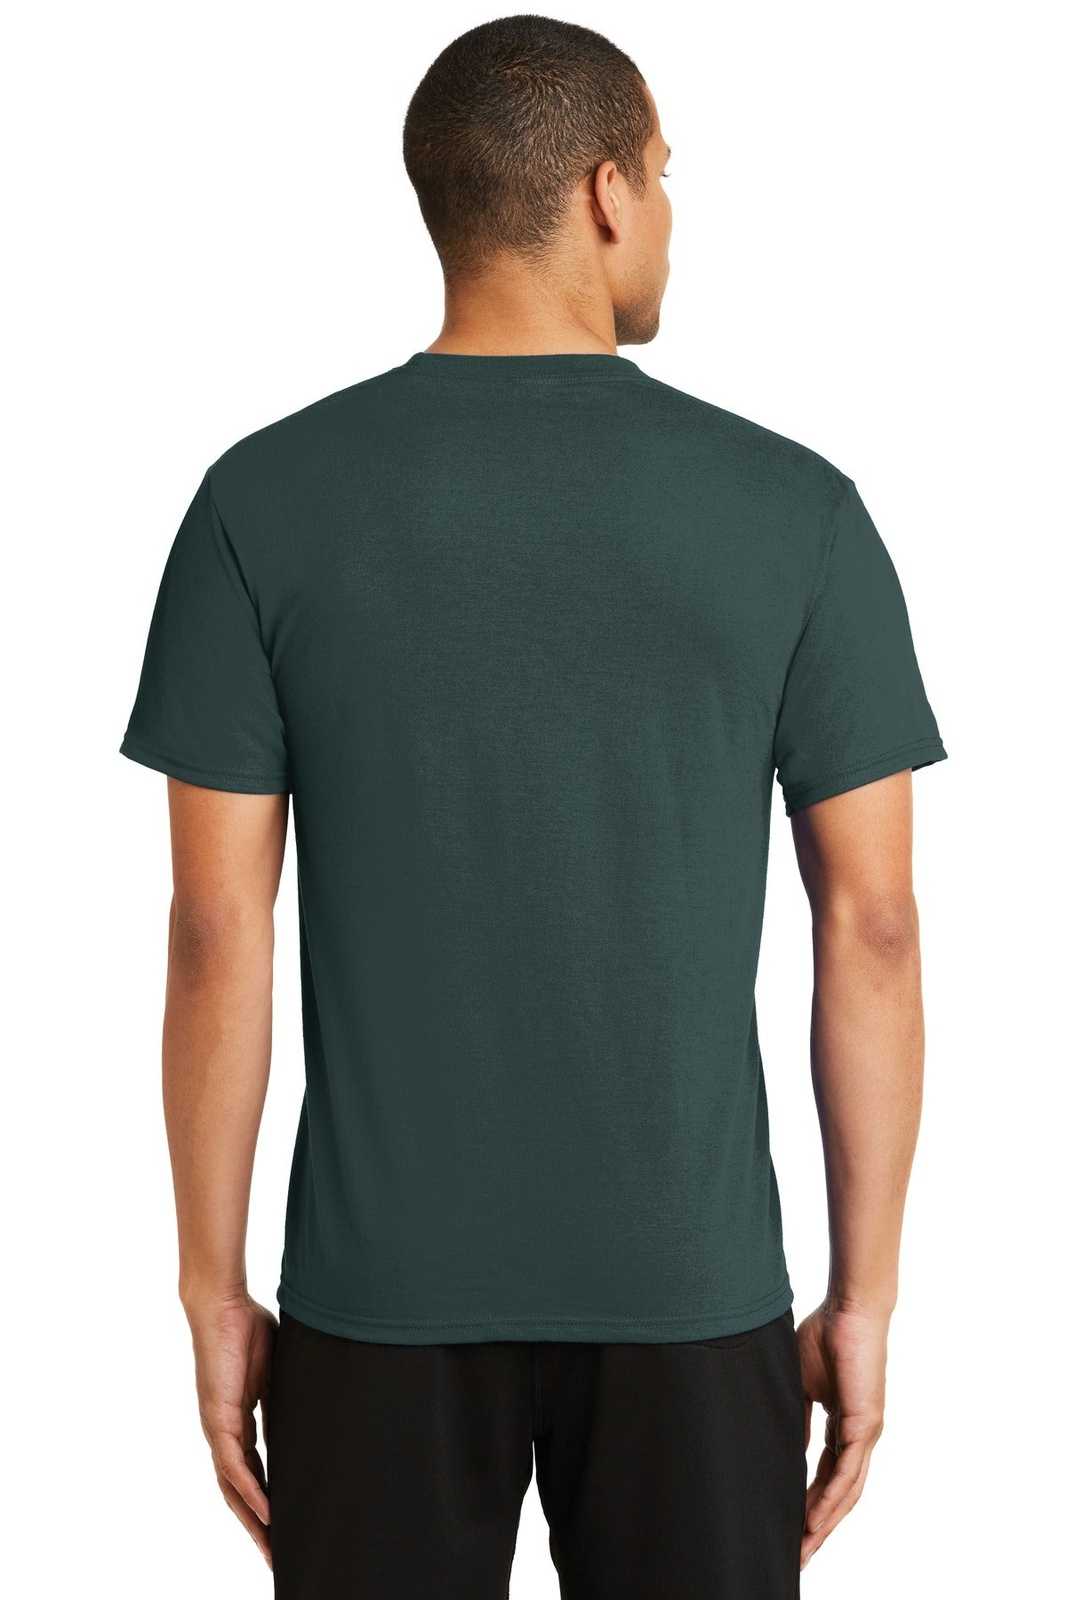 Port & Company PC381 Performance Blend Tee - Dark Green - HIT a Double - 1